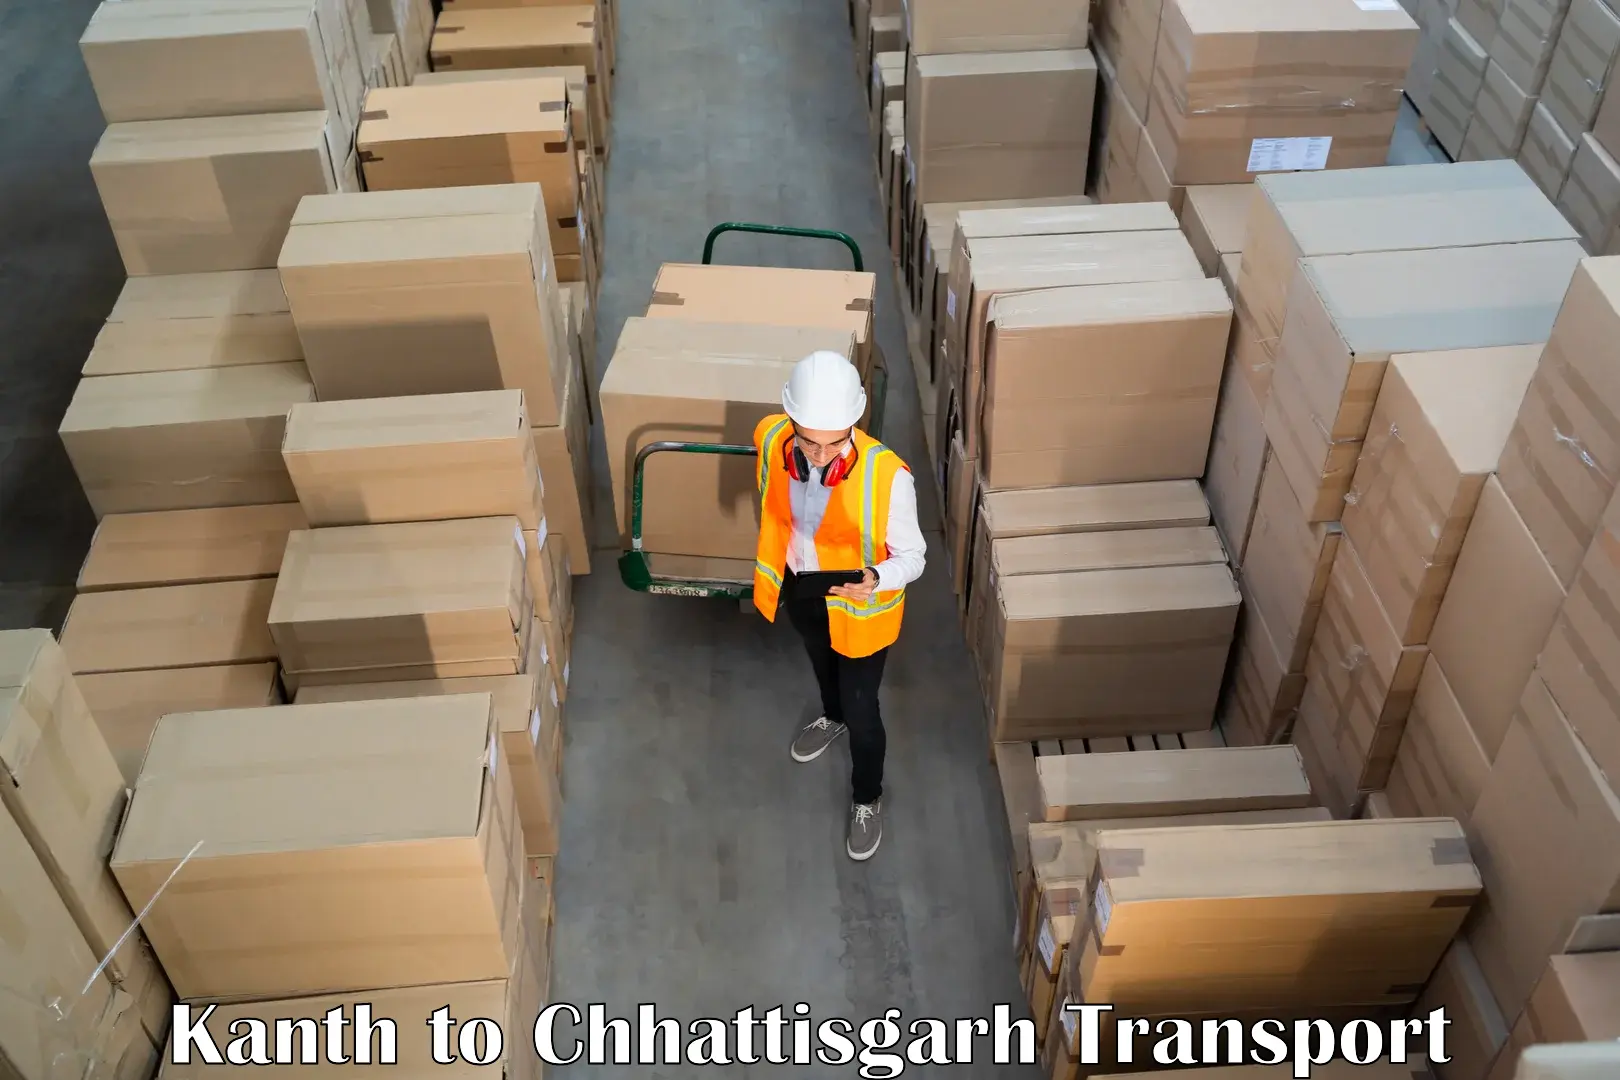 Truck transport companies in India Kanth to Chirimiri